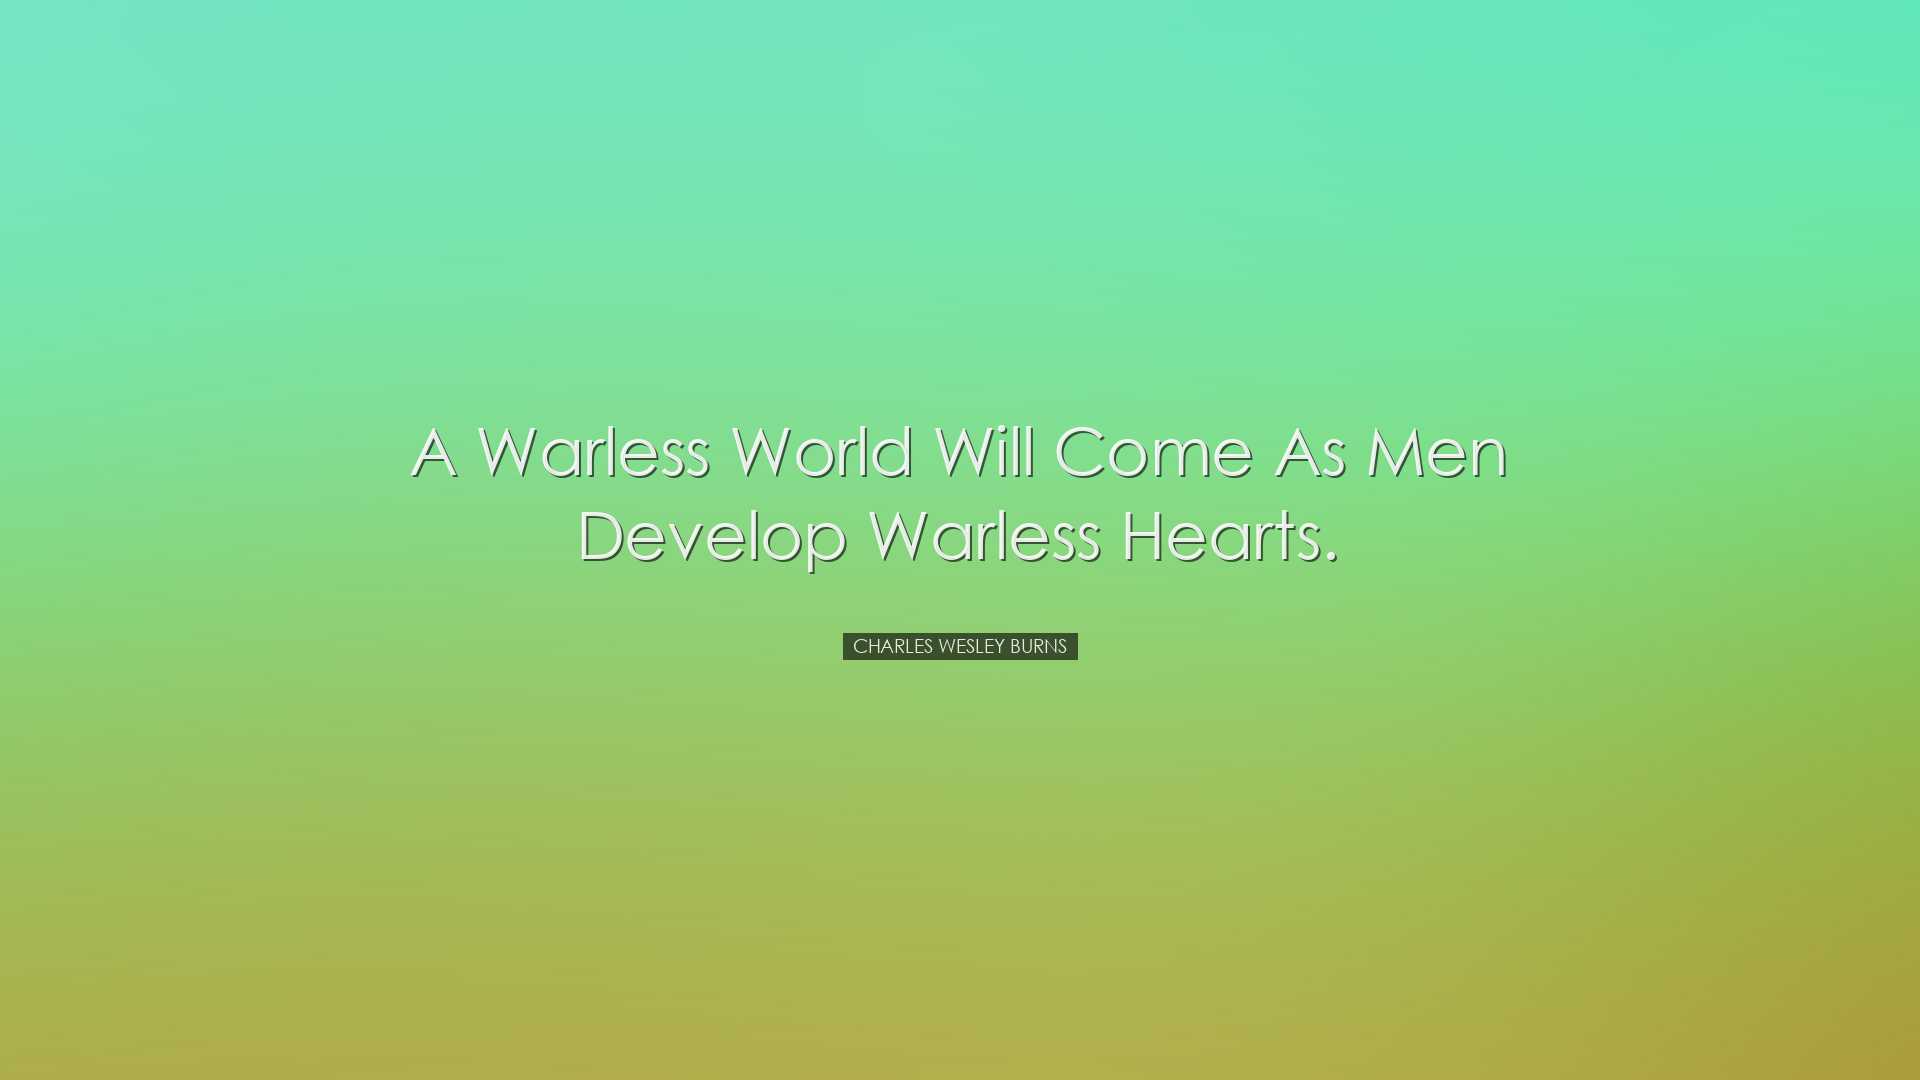 A warless world will come as men develop warless hearts. - Charles